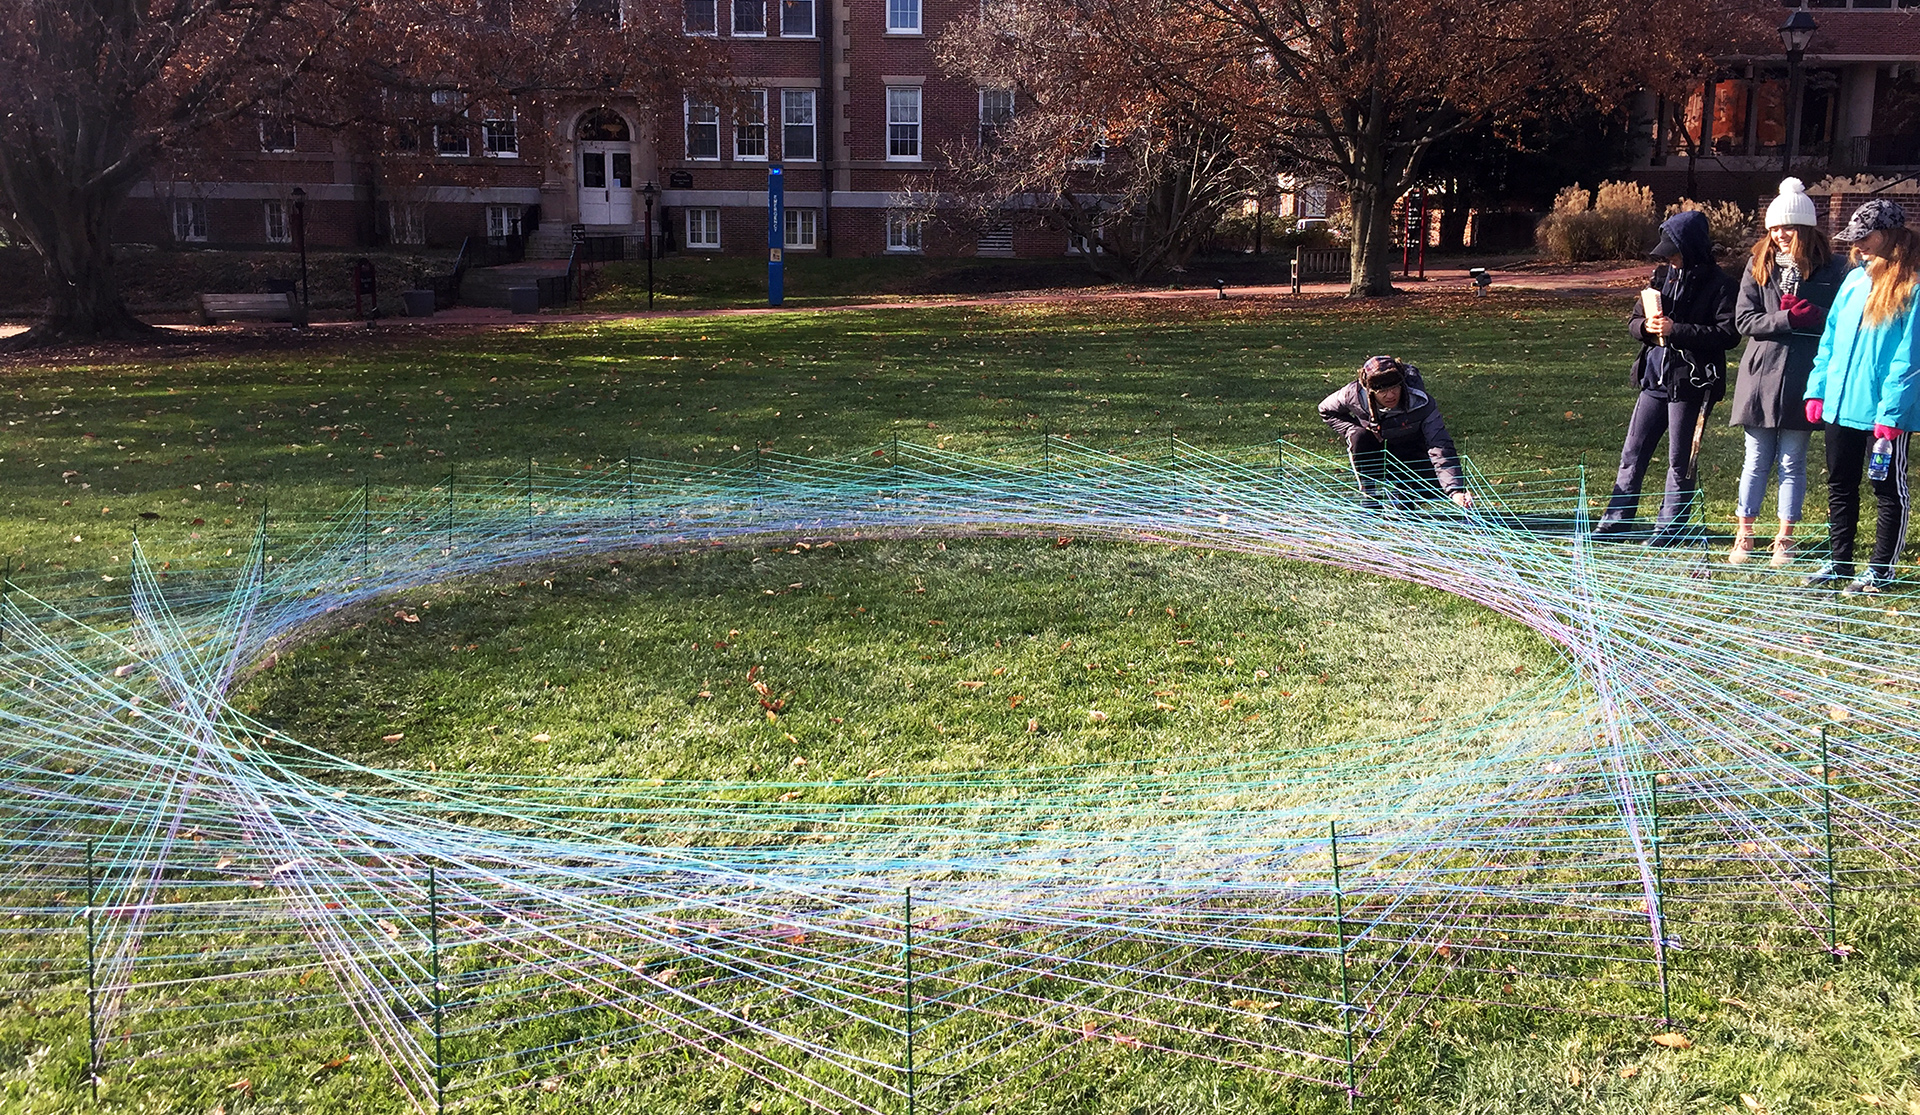 Students gathered around a student artwork made of colorful intersecting strings, in front of Bunting Hall on the WC campus